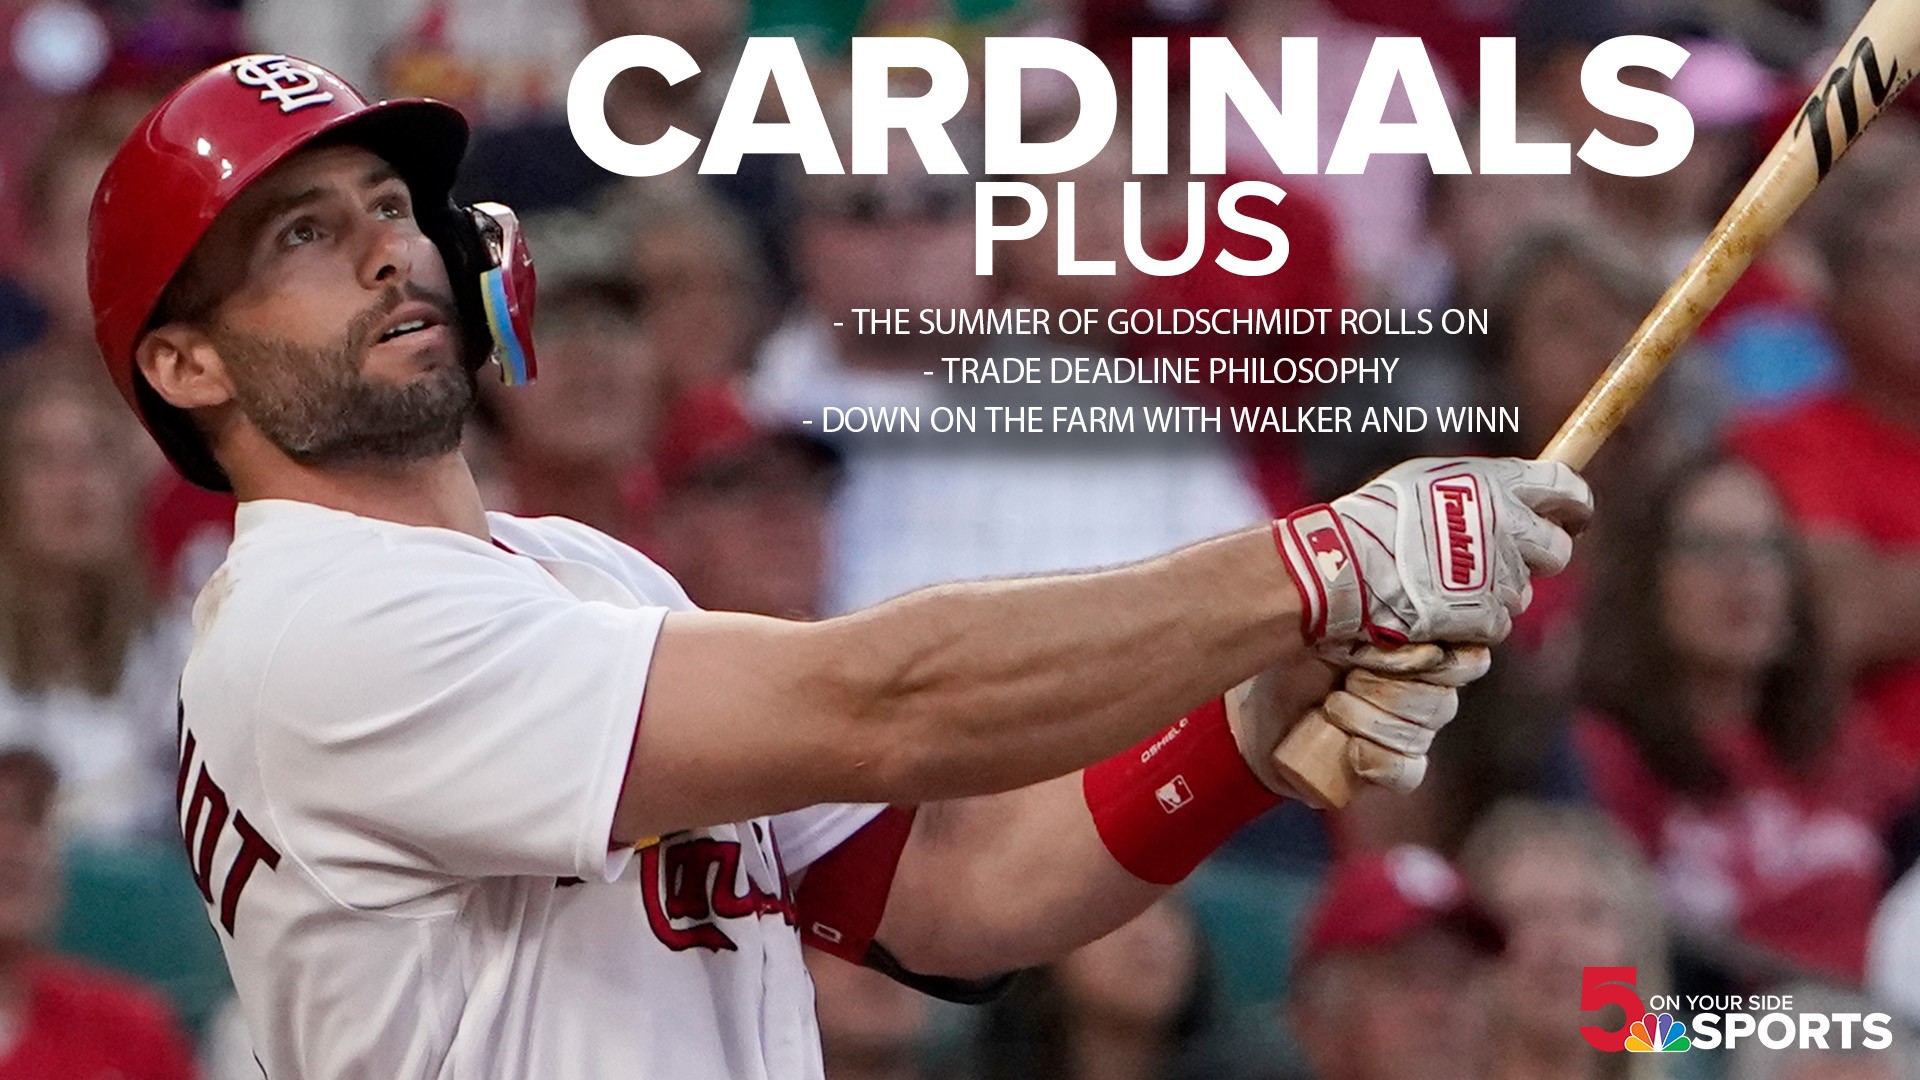 On this episode: Paul Goldschmidt is still the best in the NL, what should the Cards' trade deadline philosophy be, who's an All-Star and get to know Walker and Winn